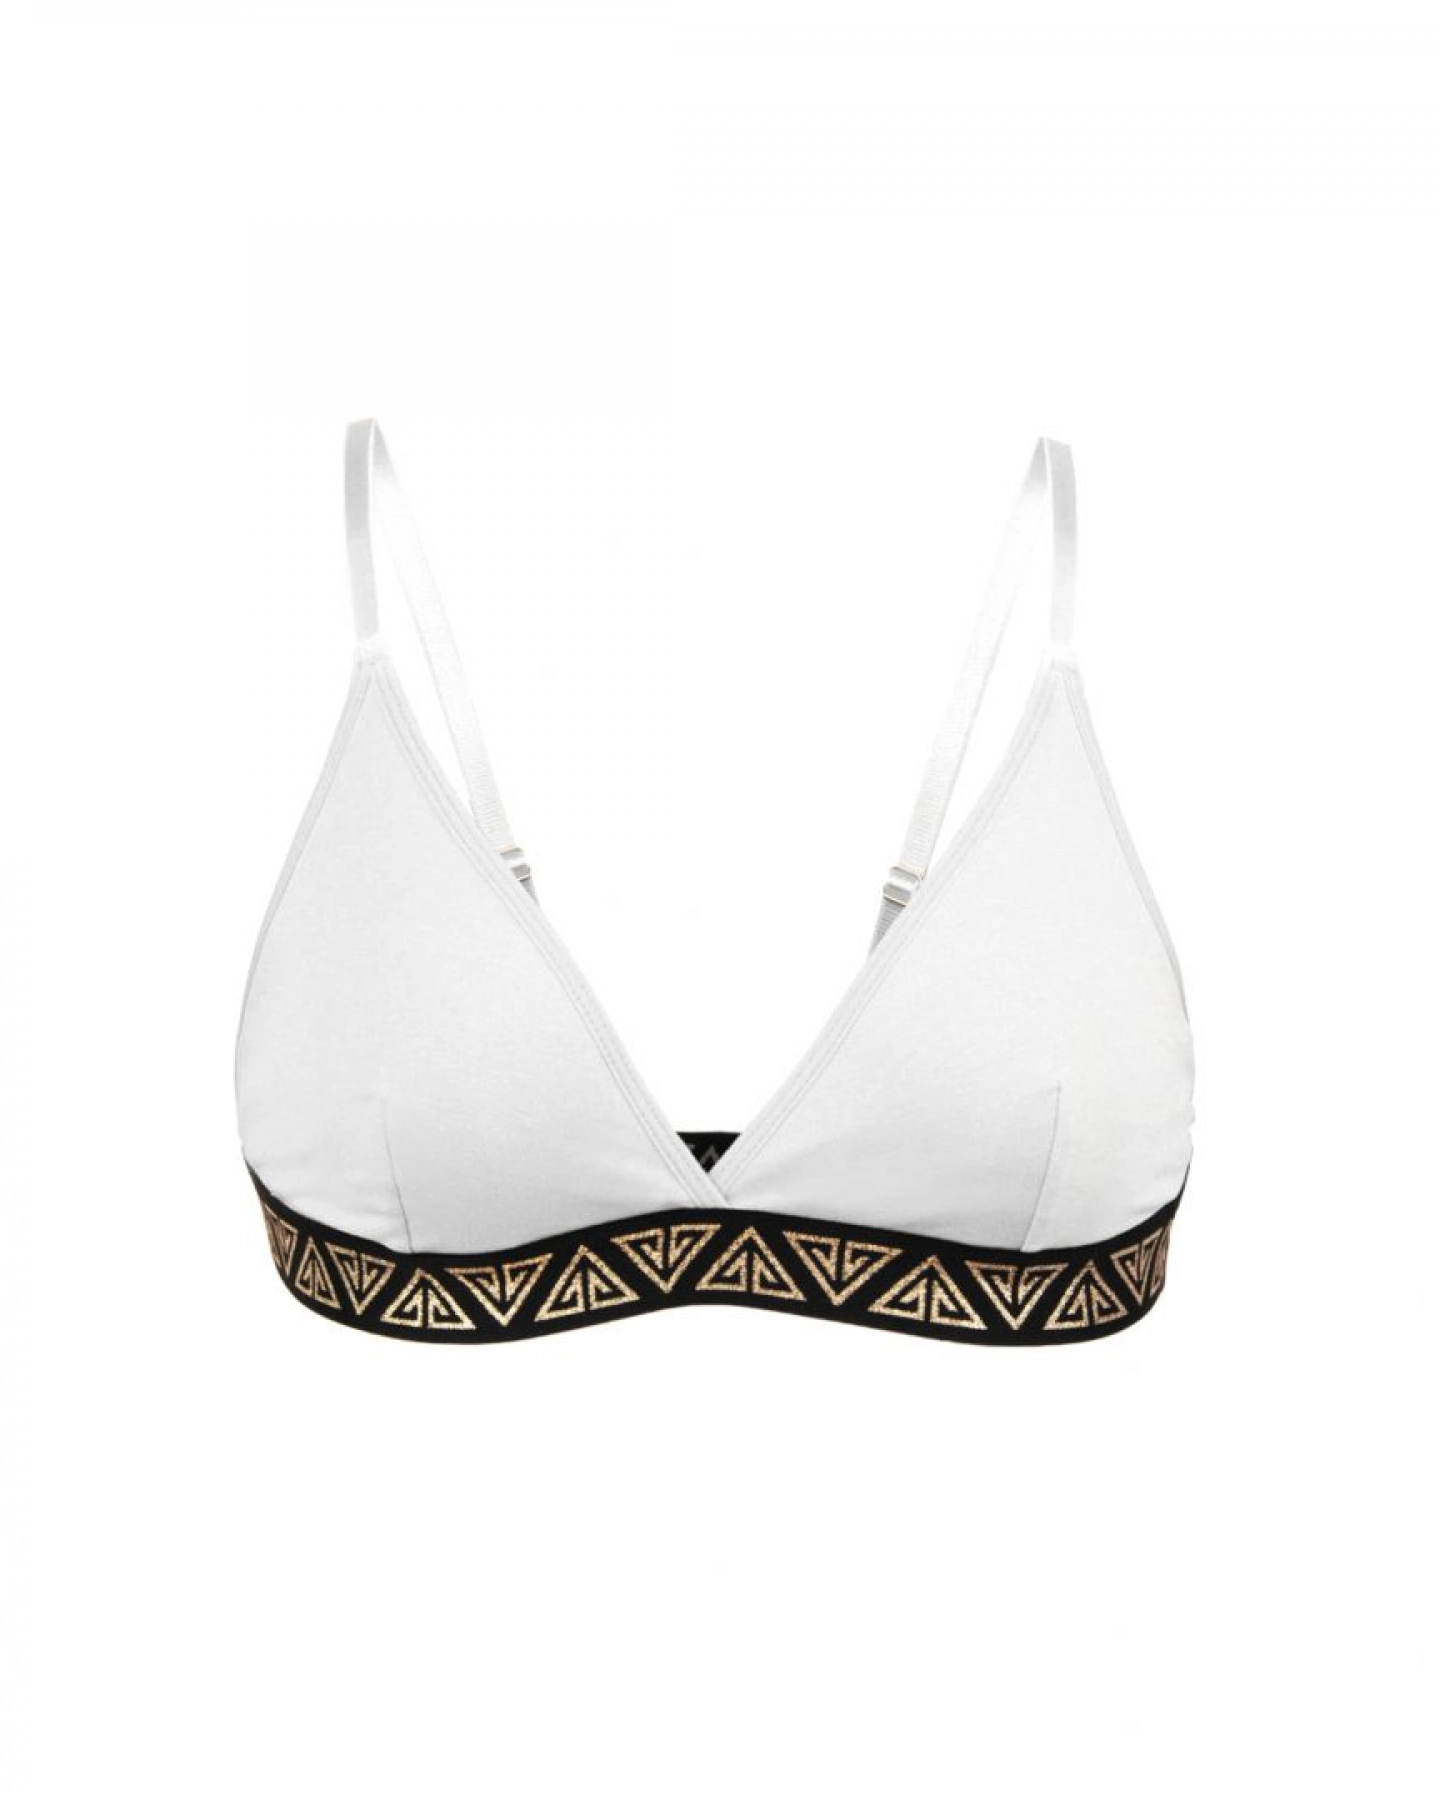 Bra without underwire comfortable lingerie Triangle